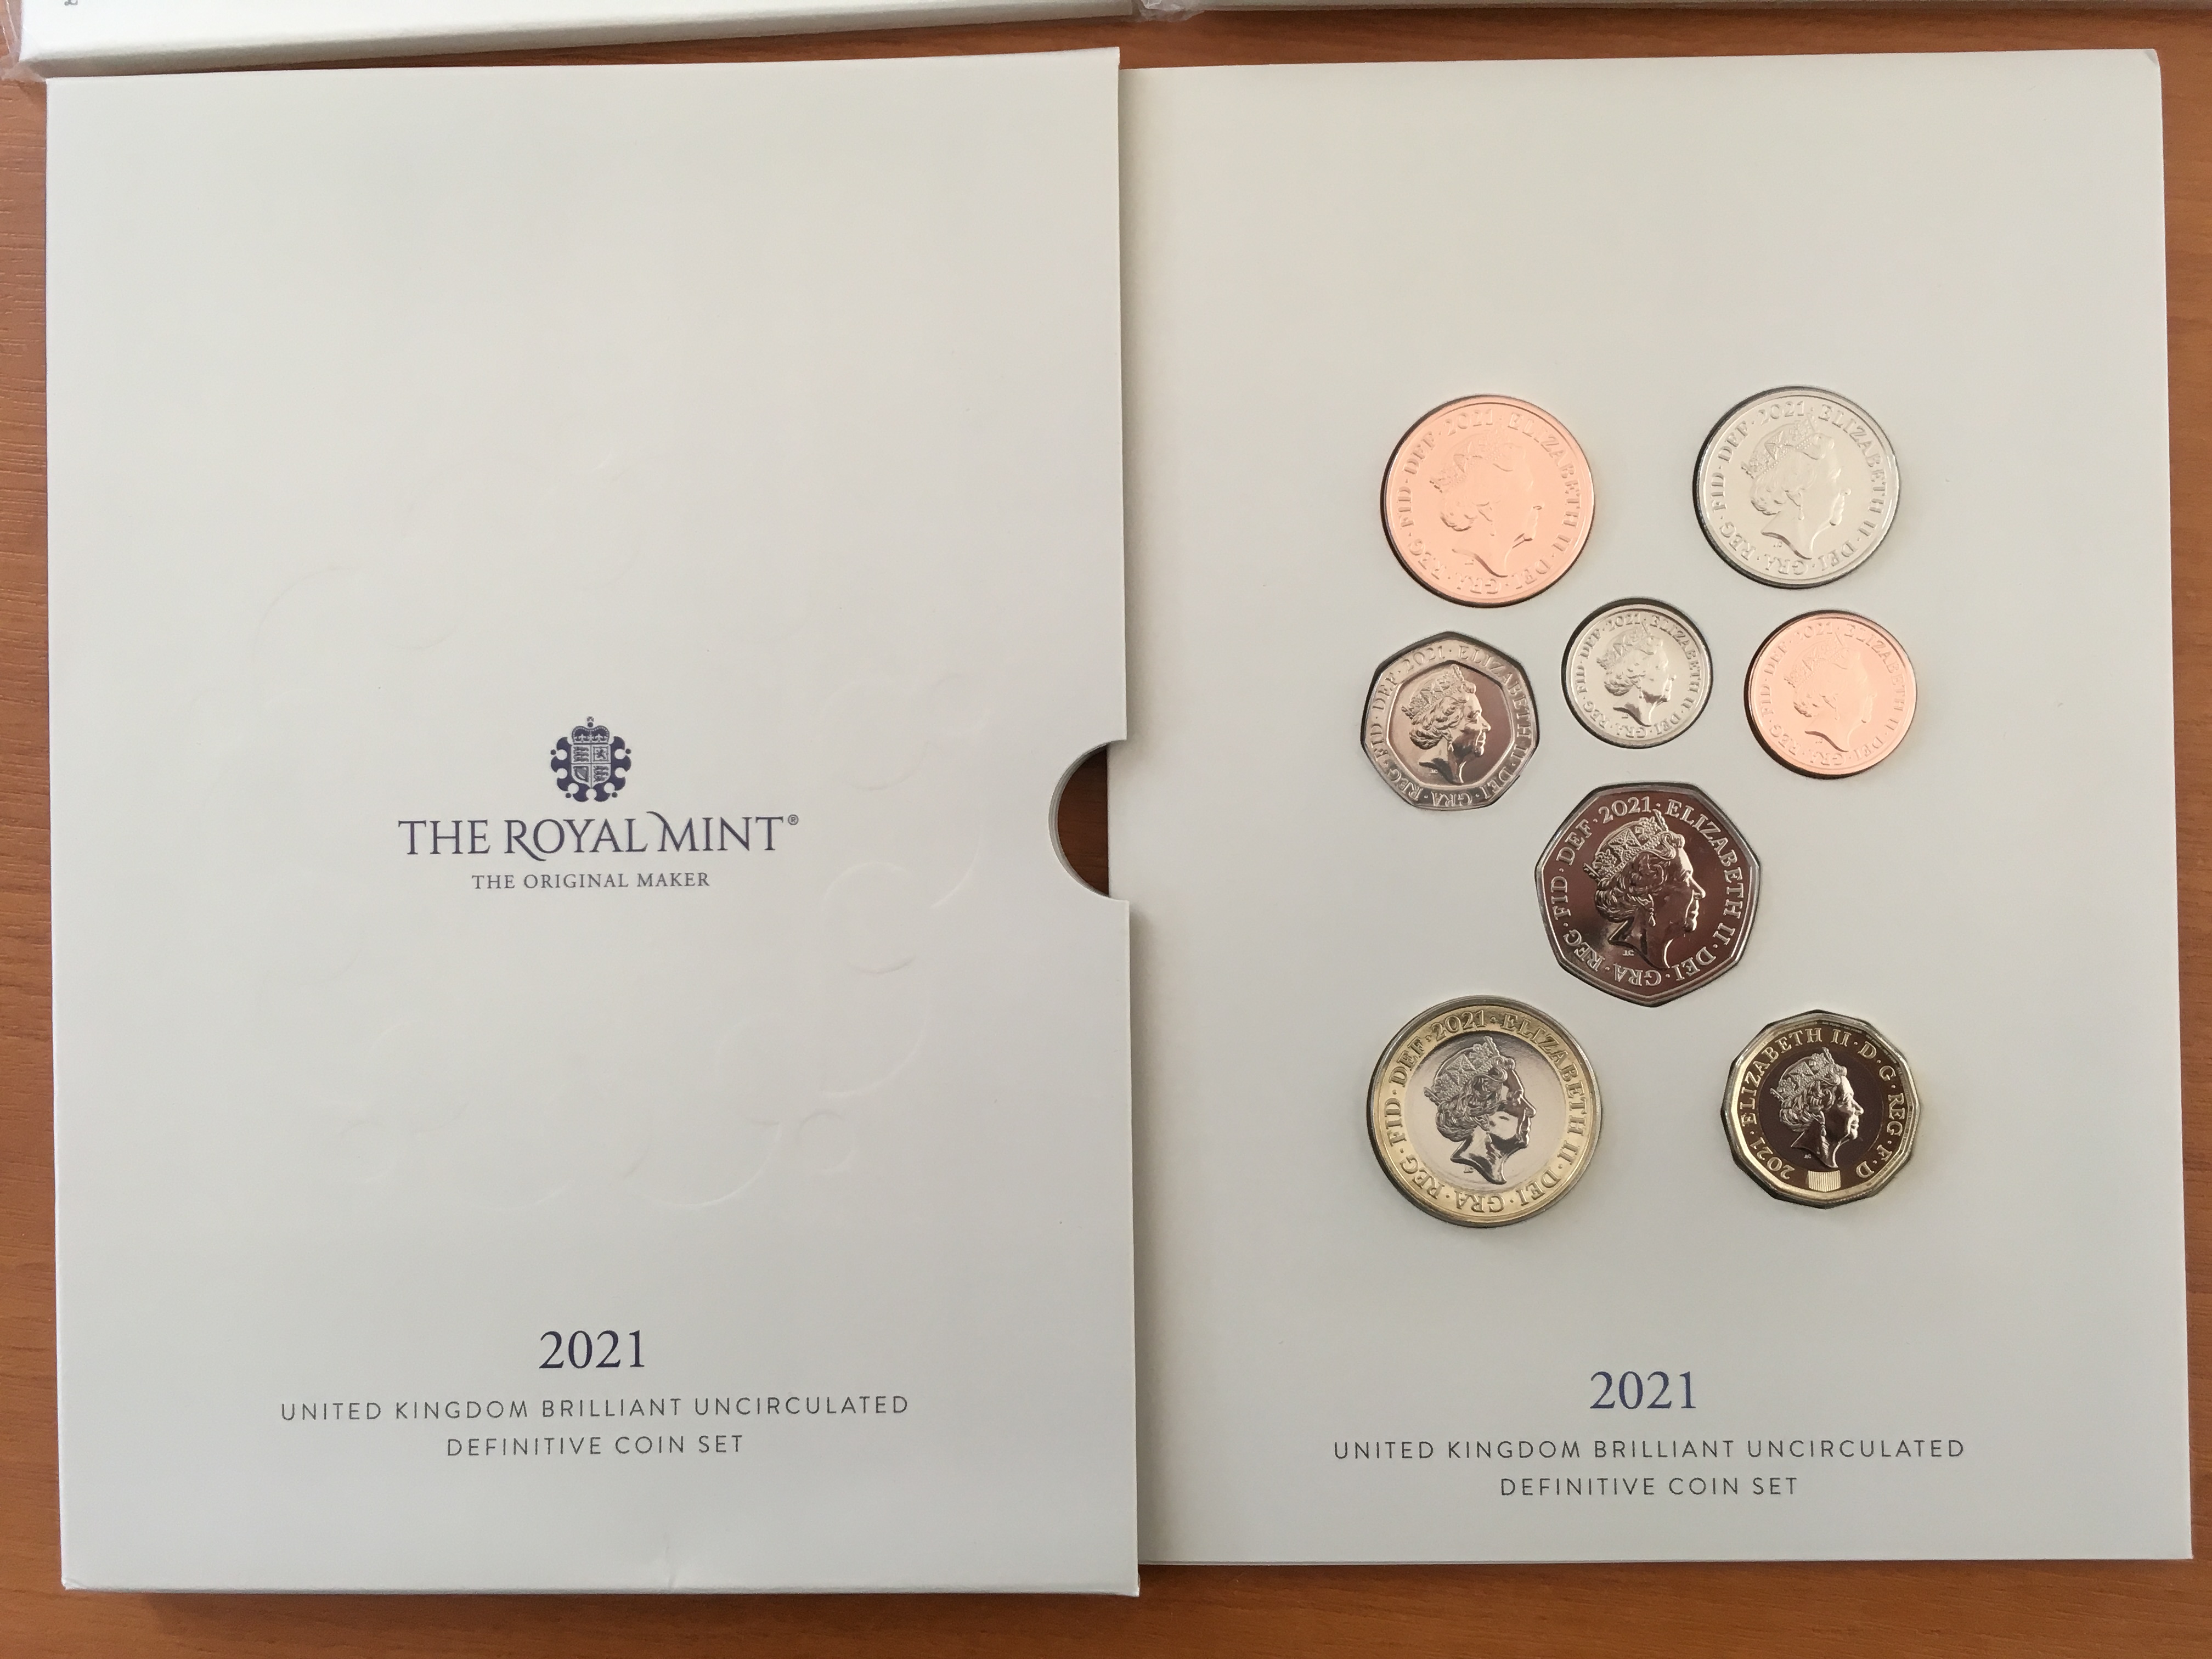 COINS: ROYAL MINT 2021 UNCIRCULATED DEFINITIVE COIN SET PLUS FURTHER CARD WITH THE SAME COINS, - Image 6 of 8